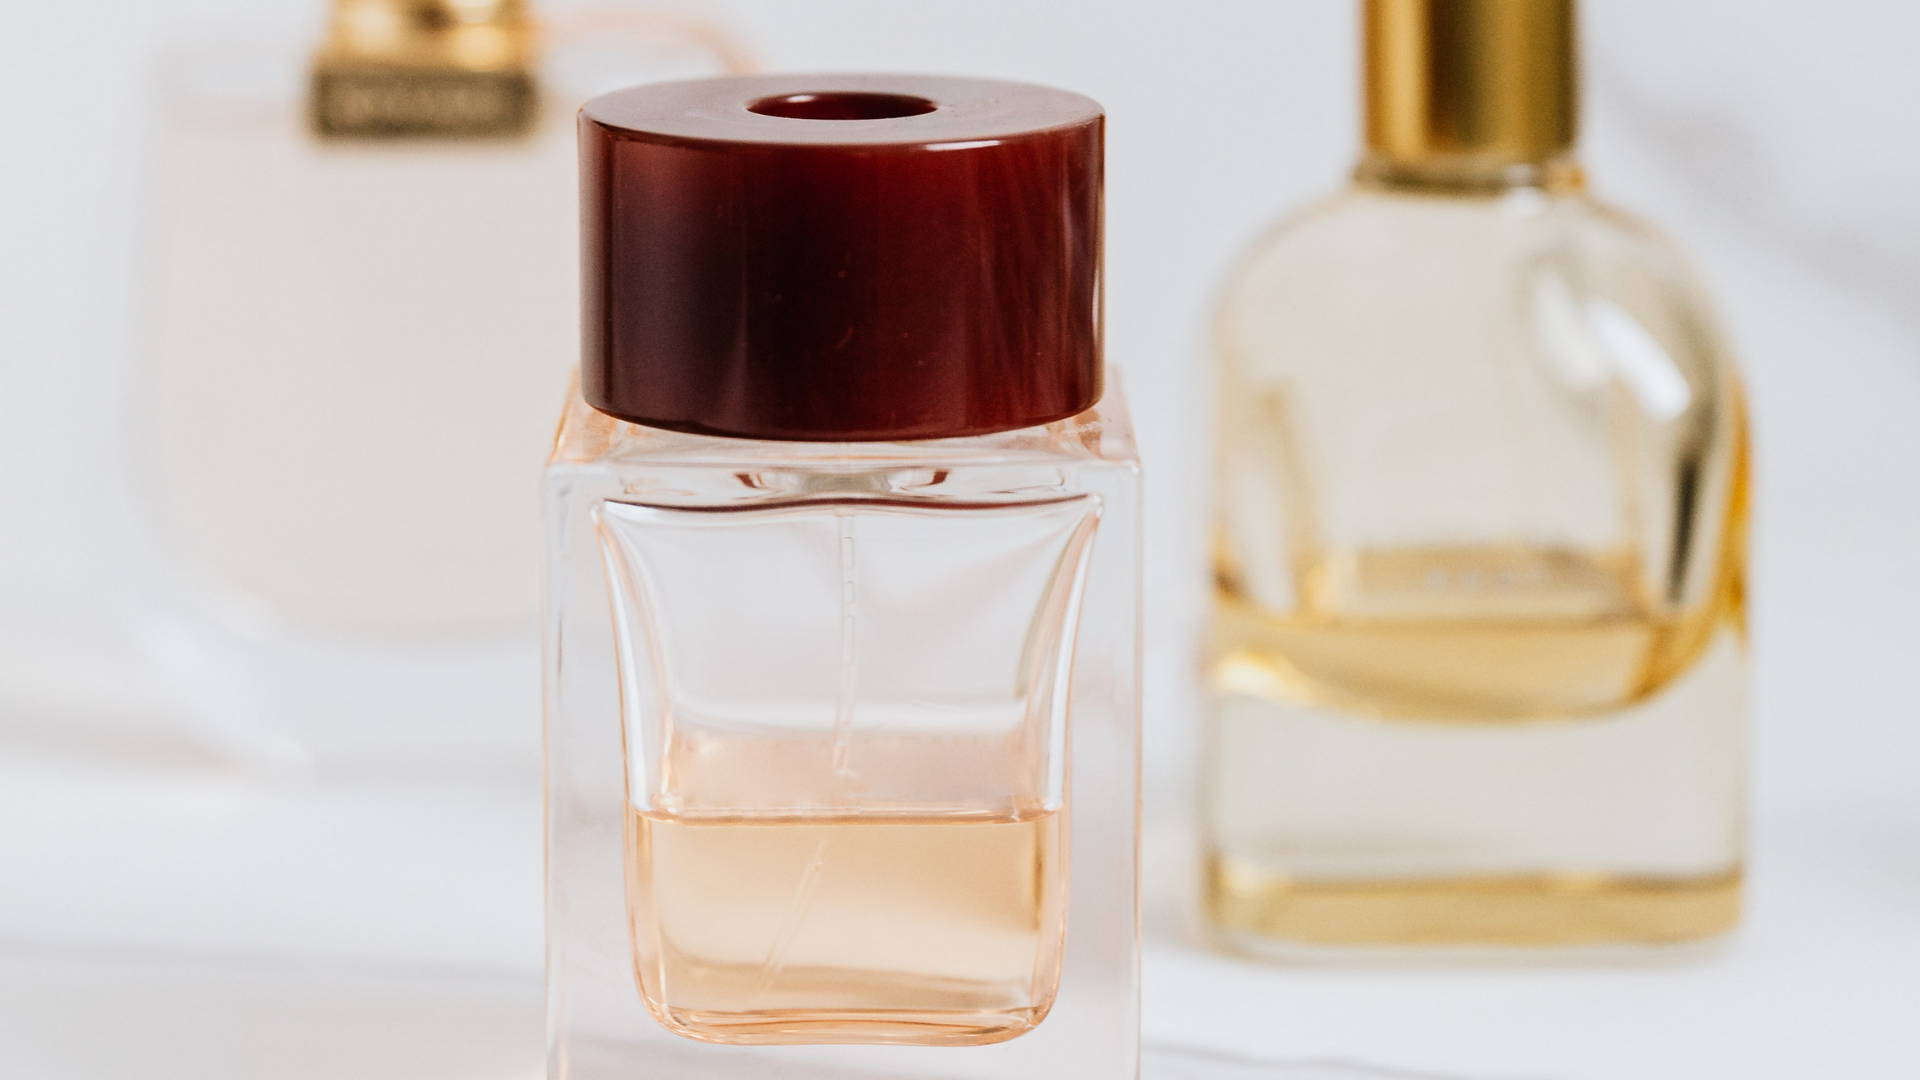 Dangers of Artificial Fragrances, Why We Only Use Natural Scents